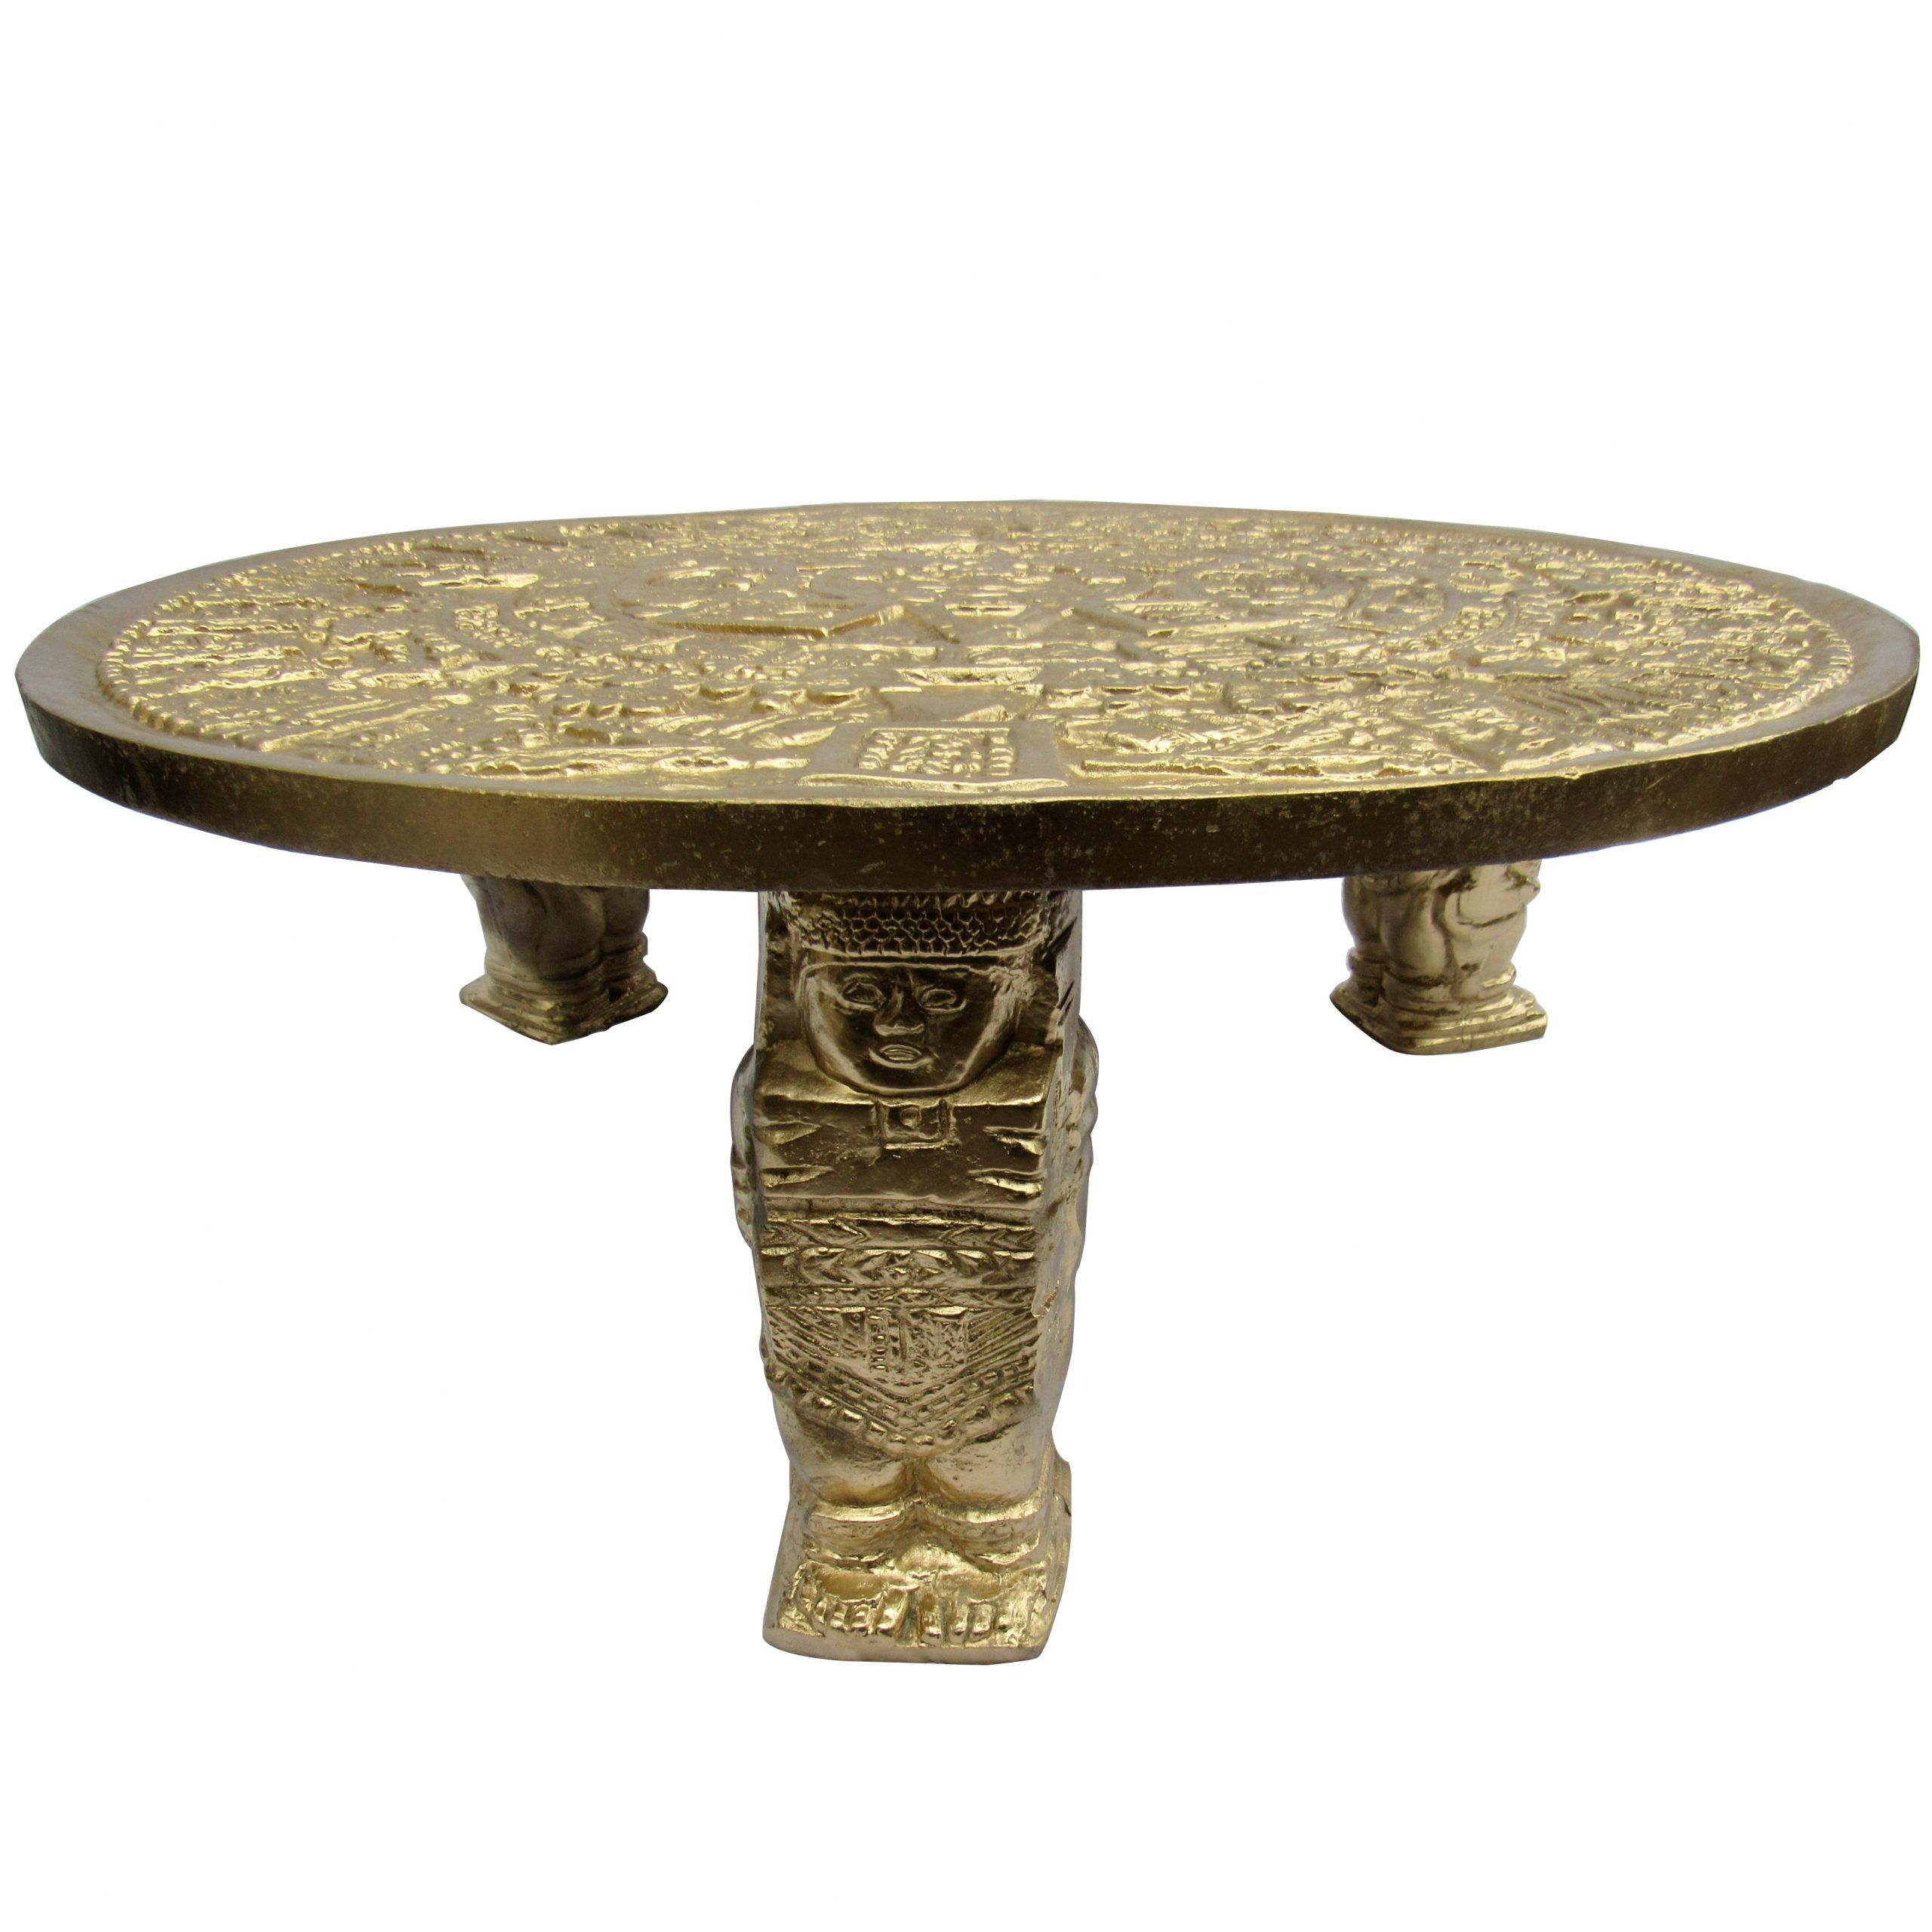 Gilt Bas  Relief Aztec Calendar Coffee Table Cast Aluminium, Mexican, 1960S Intended For Most Up To Date Aztec Round Pedestal Dining Tables (Photo 15 of 25)